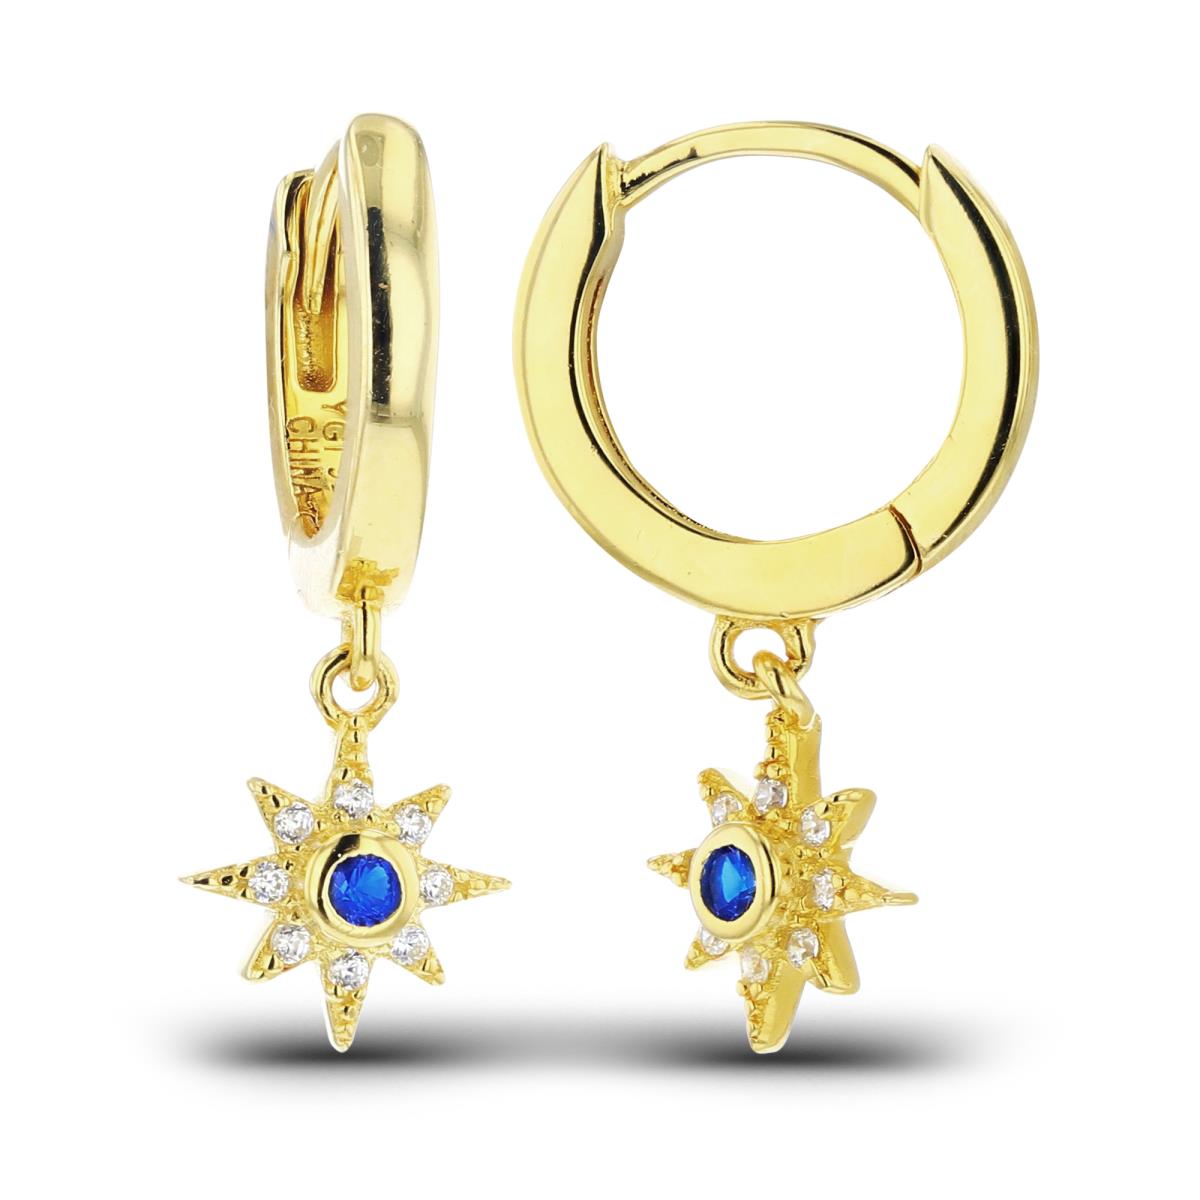 Sterling Silver+1Micron Yellow Gold Rnd #113 Blue Spinel Bezel & White CZ Star Dangling on 12x2mm Huggie Earrings